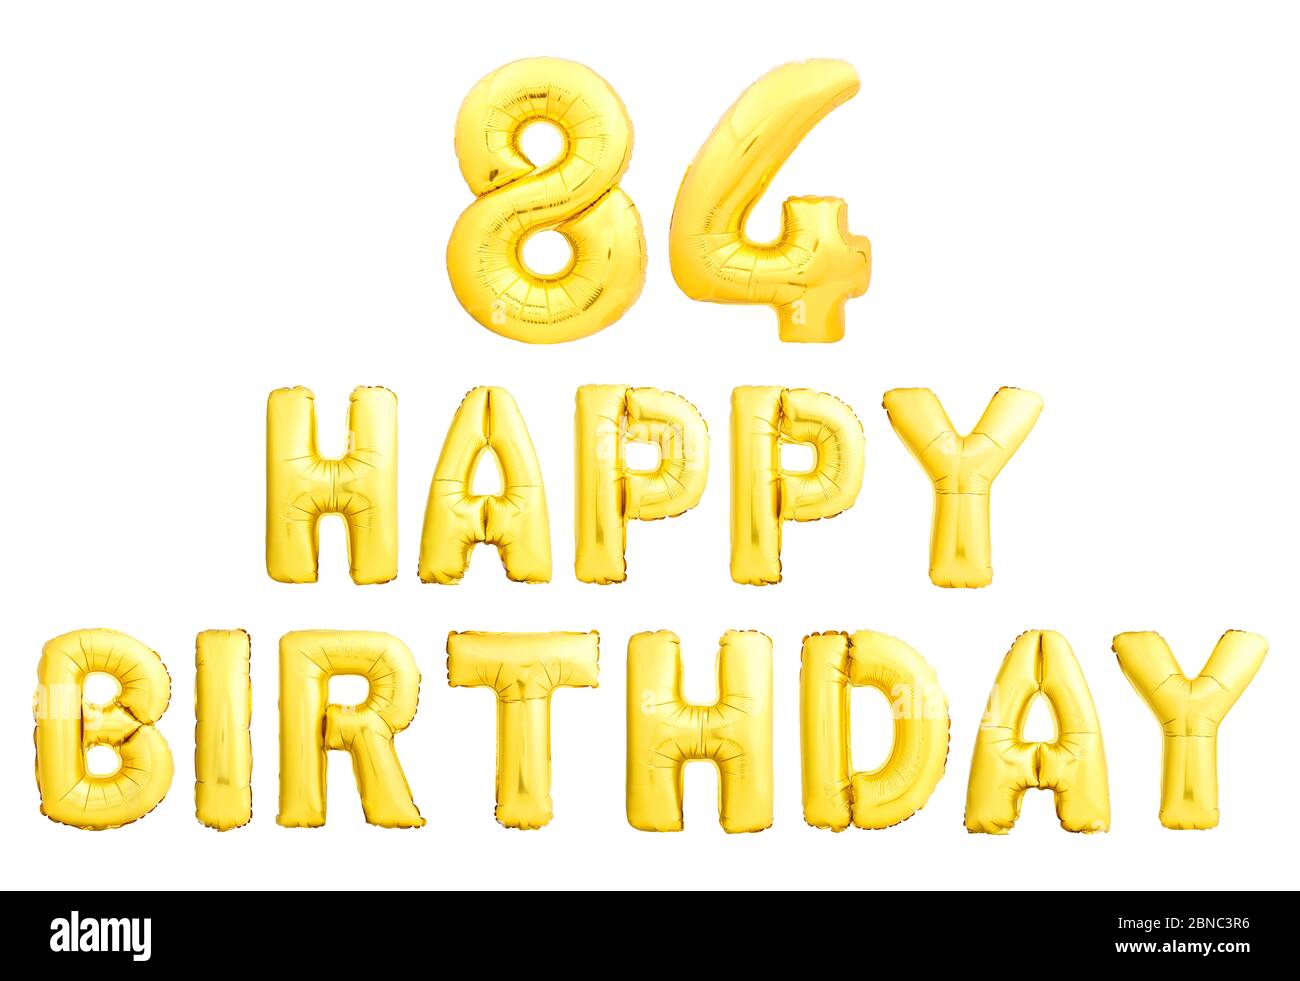 Happy birthday 84 years golden inflatable balloons isolated on white background Stock Photo